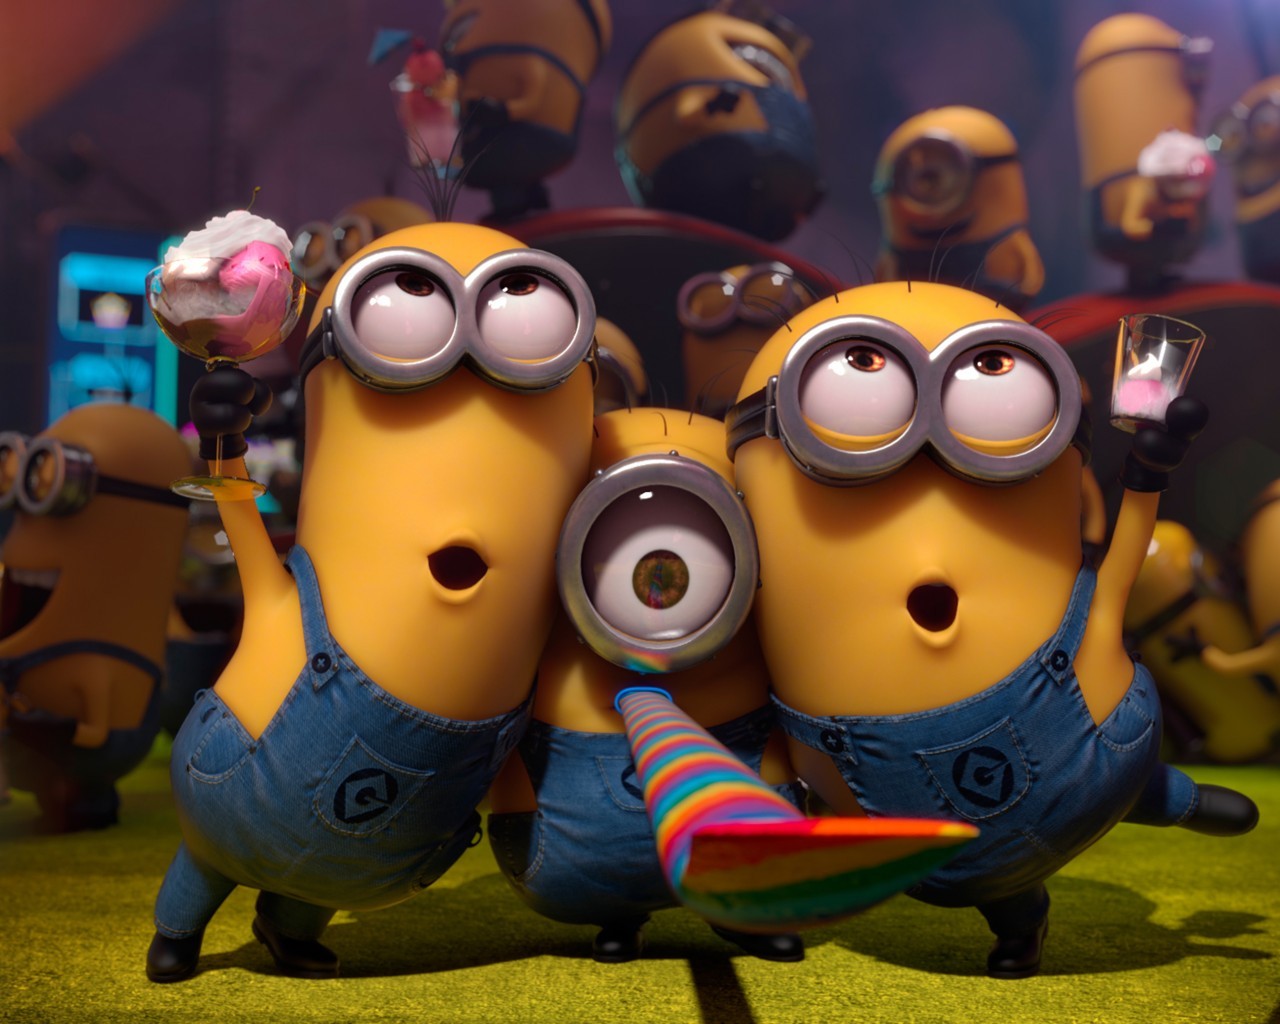 Best Despicable Me wallpapers for phone screen